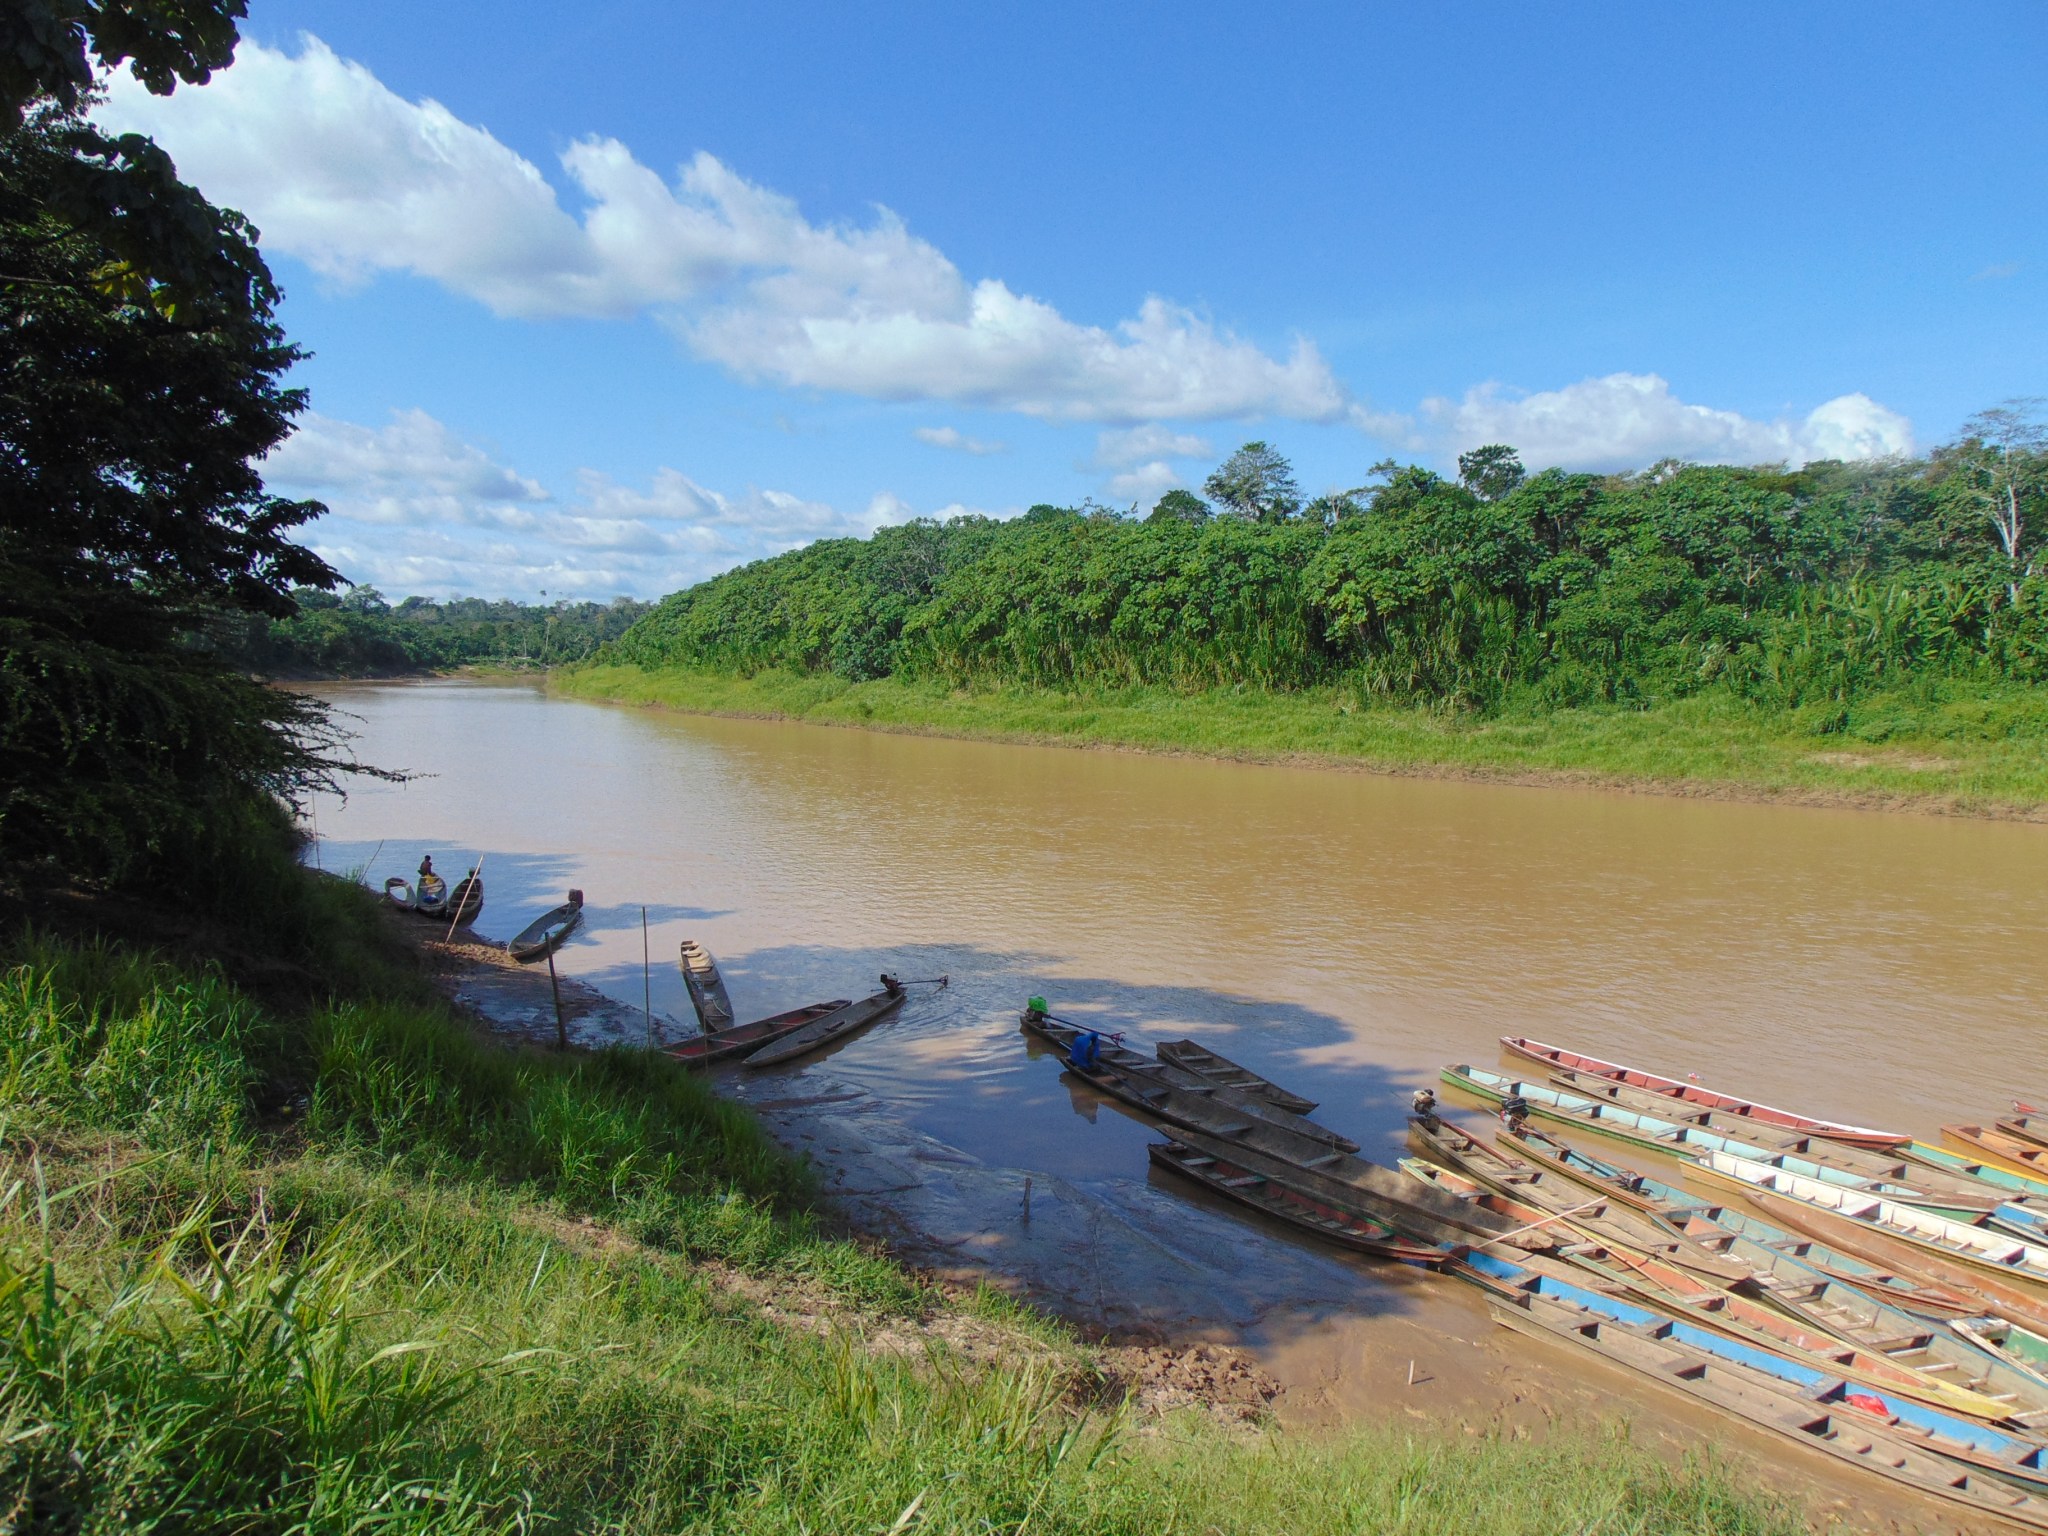 The view of a river that looks brown with boats along the bank.